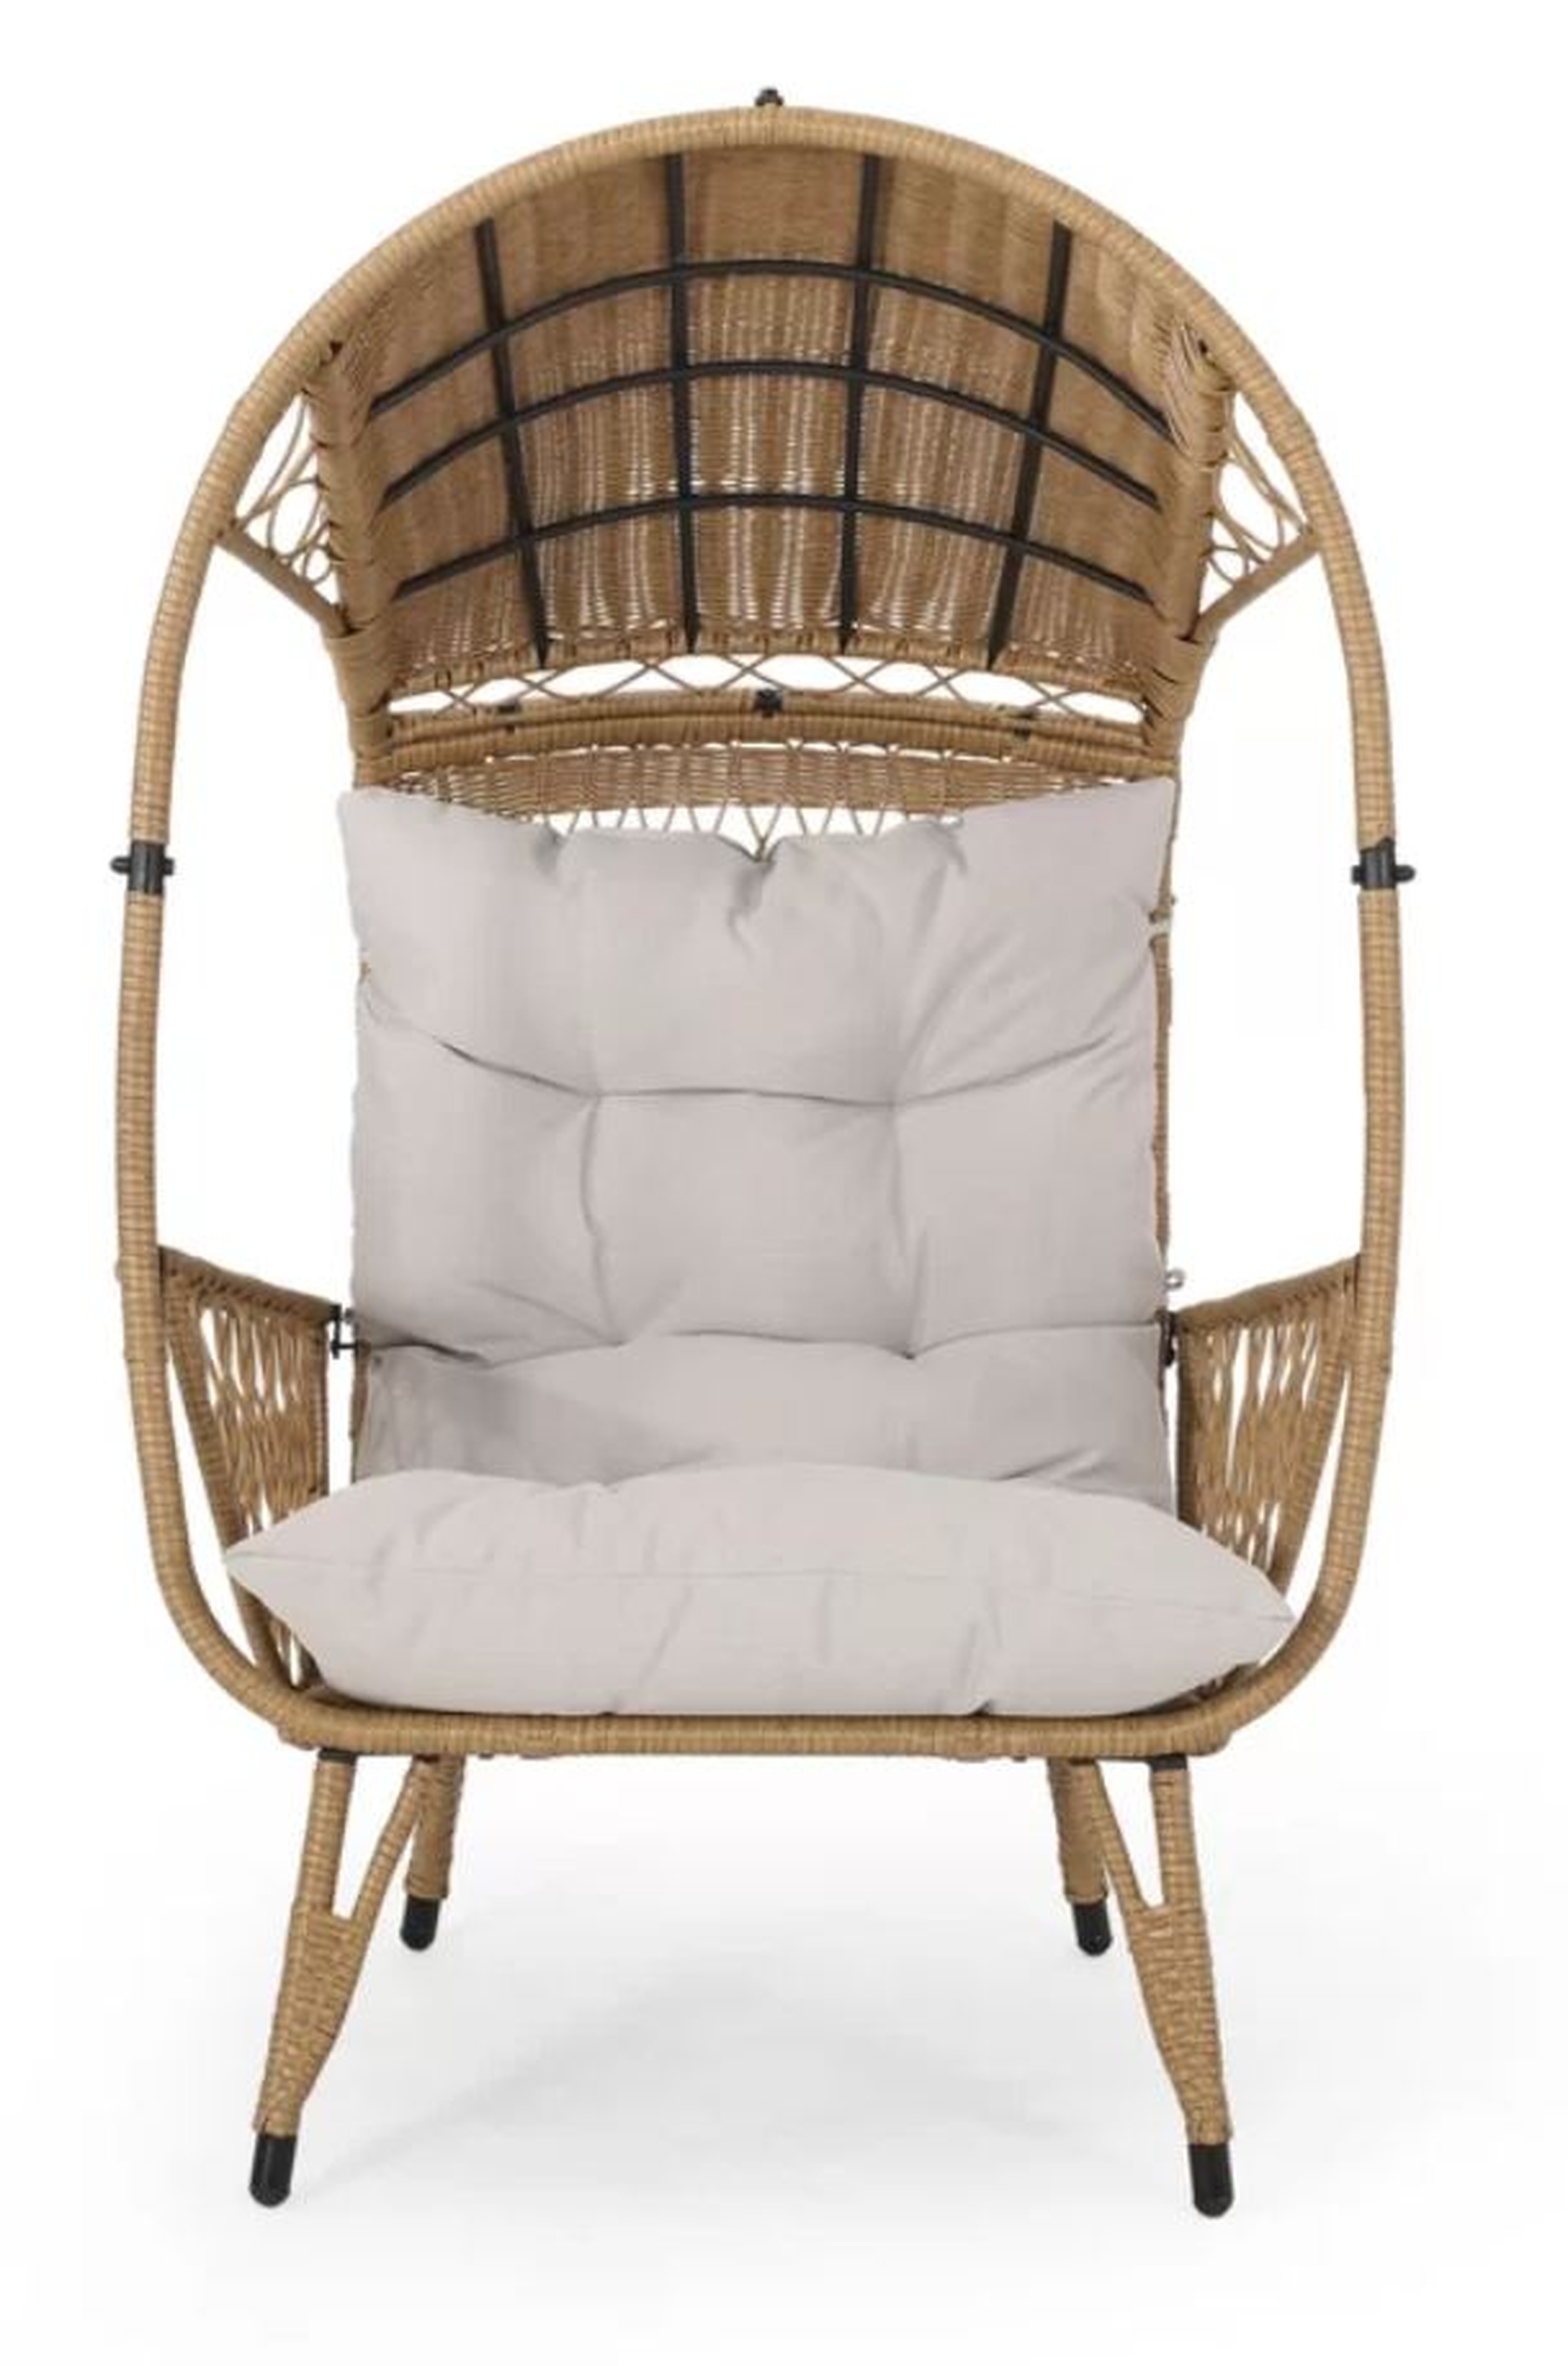 Molly Outdoor Standing Basket Chair with Cushion Molly Outdoor Wicker Standing Patio Chair with Cushion - Wayfair